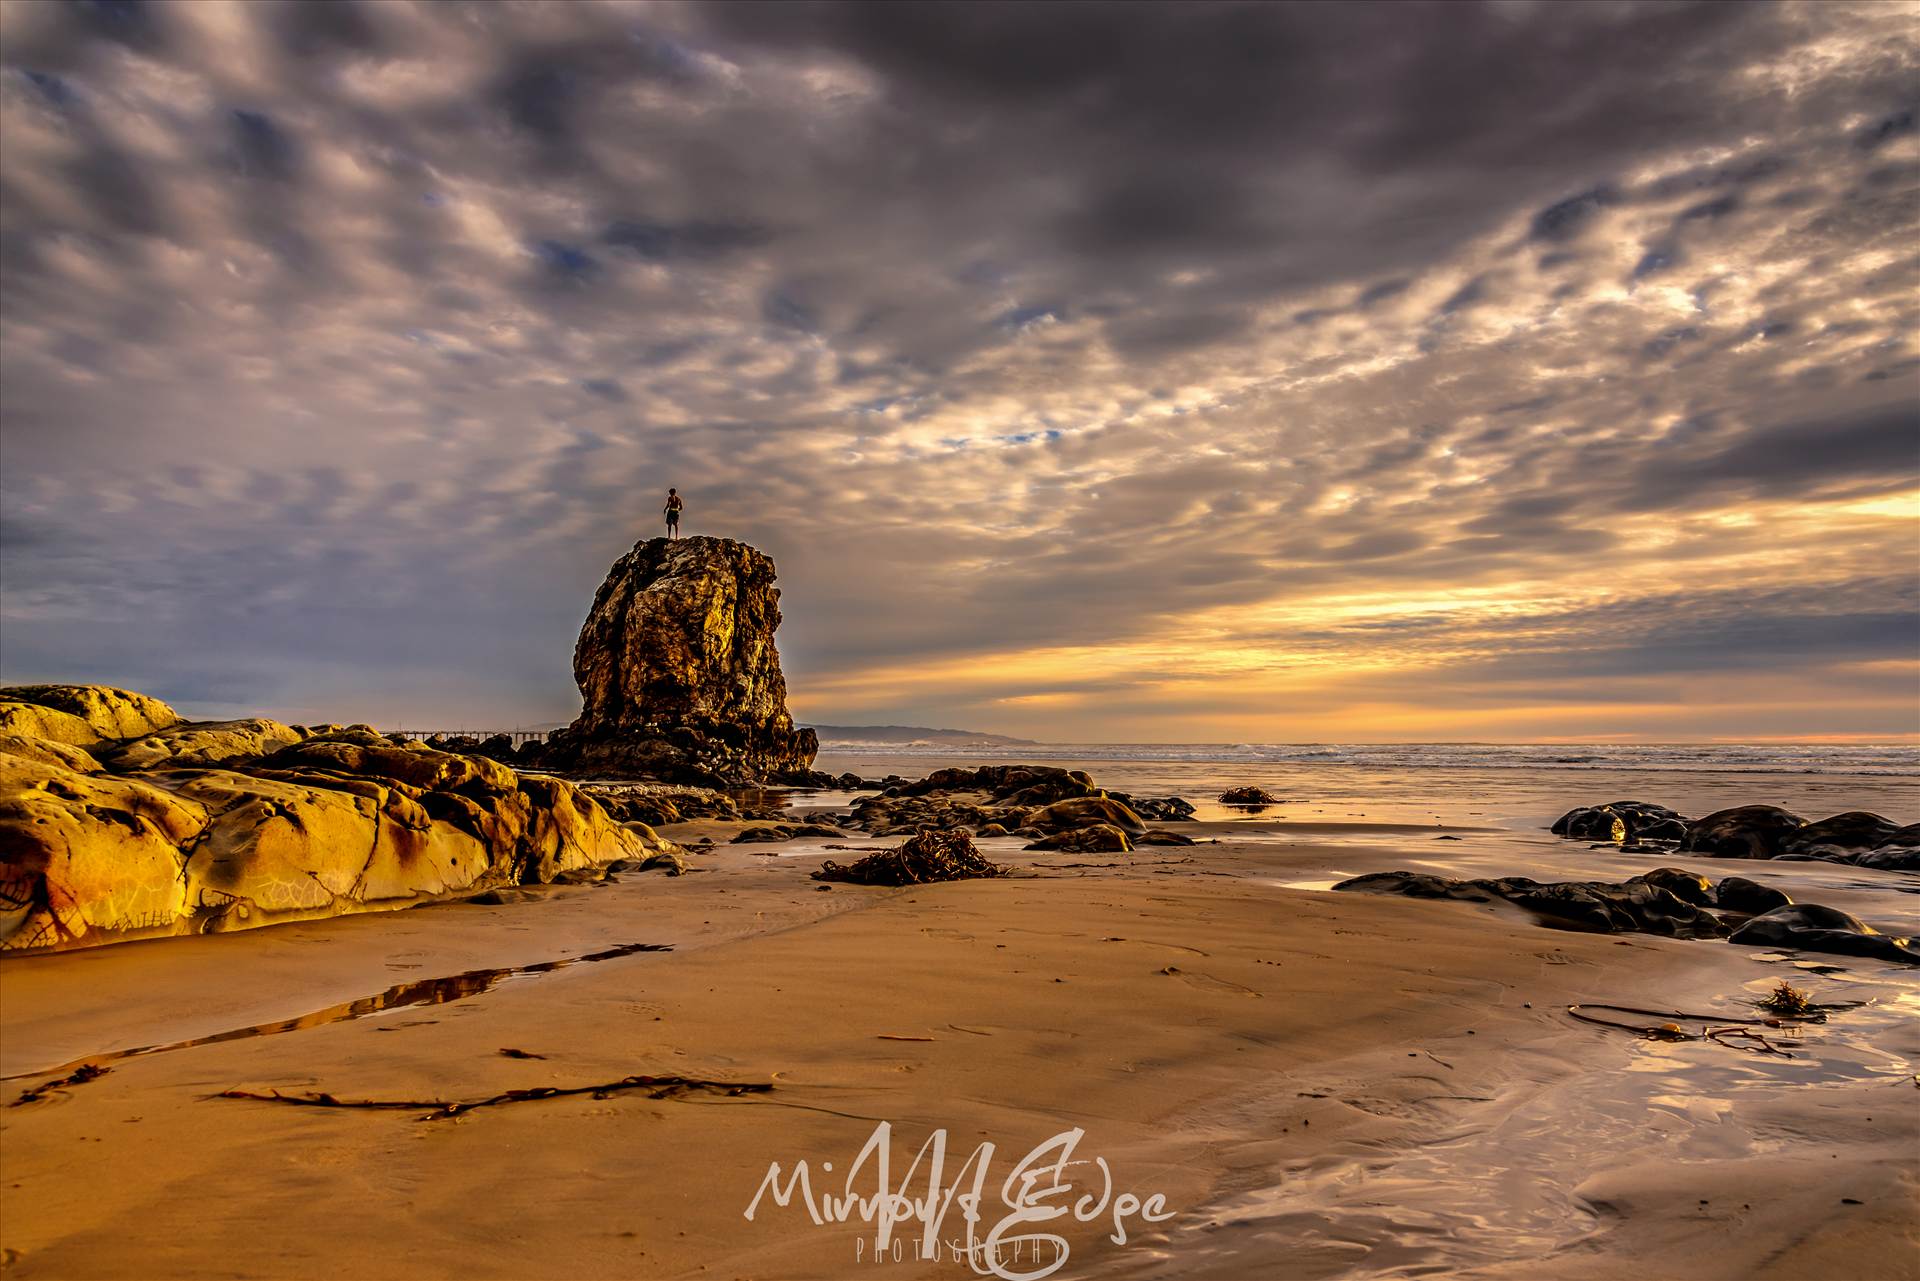 Man on Lonely Rock 010816.jpg - undefined by Sarah Williams